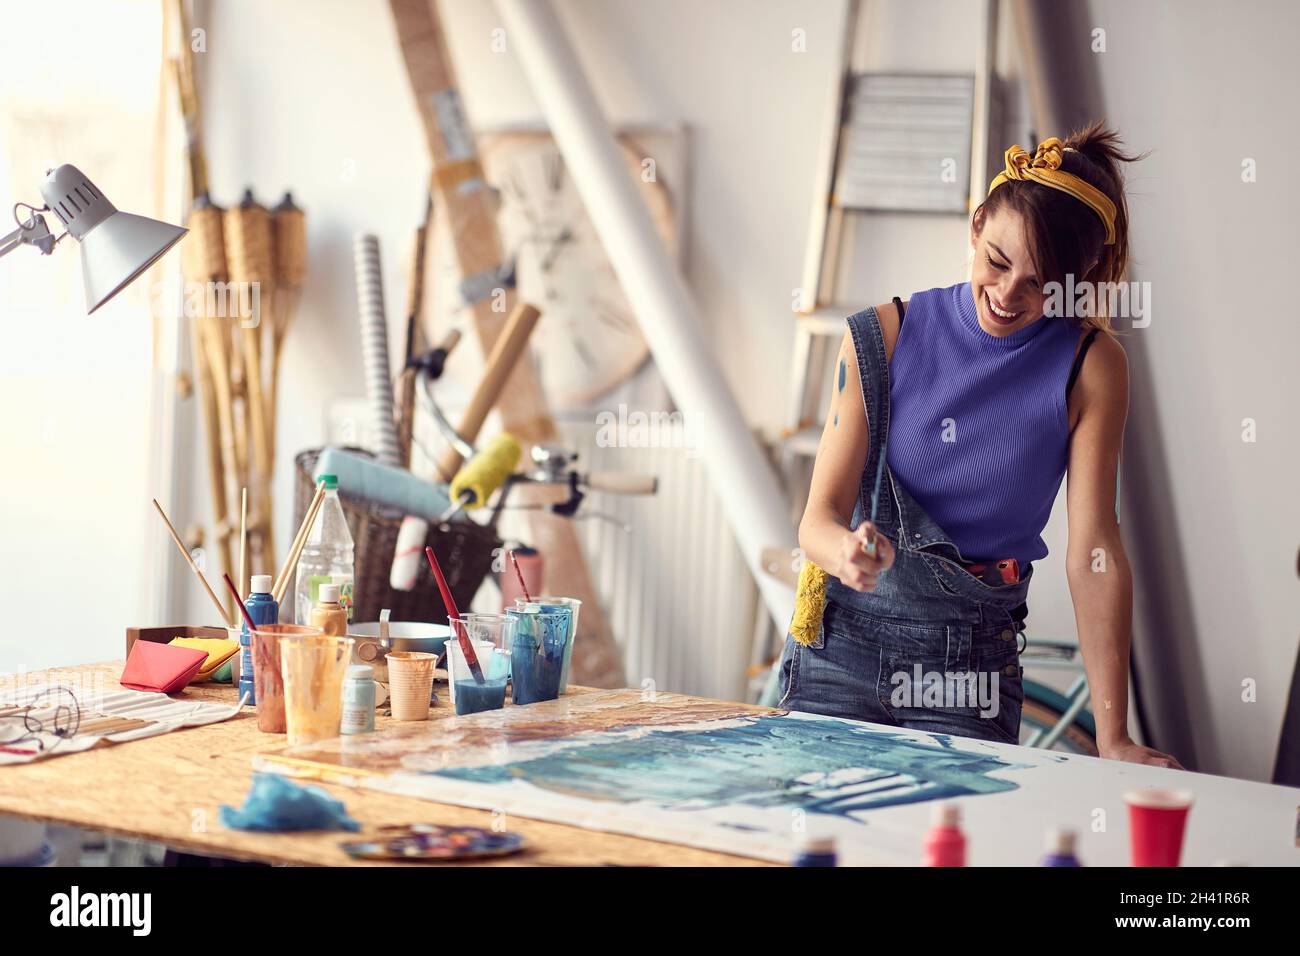 Woman painter drawing on a canvas in art studio. Stock Photo